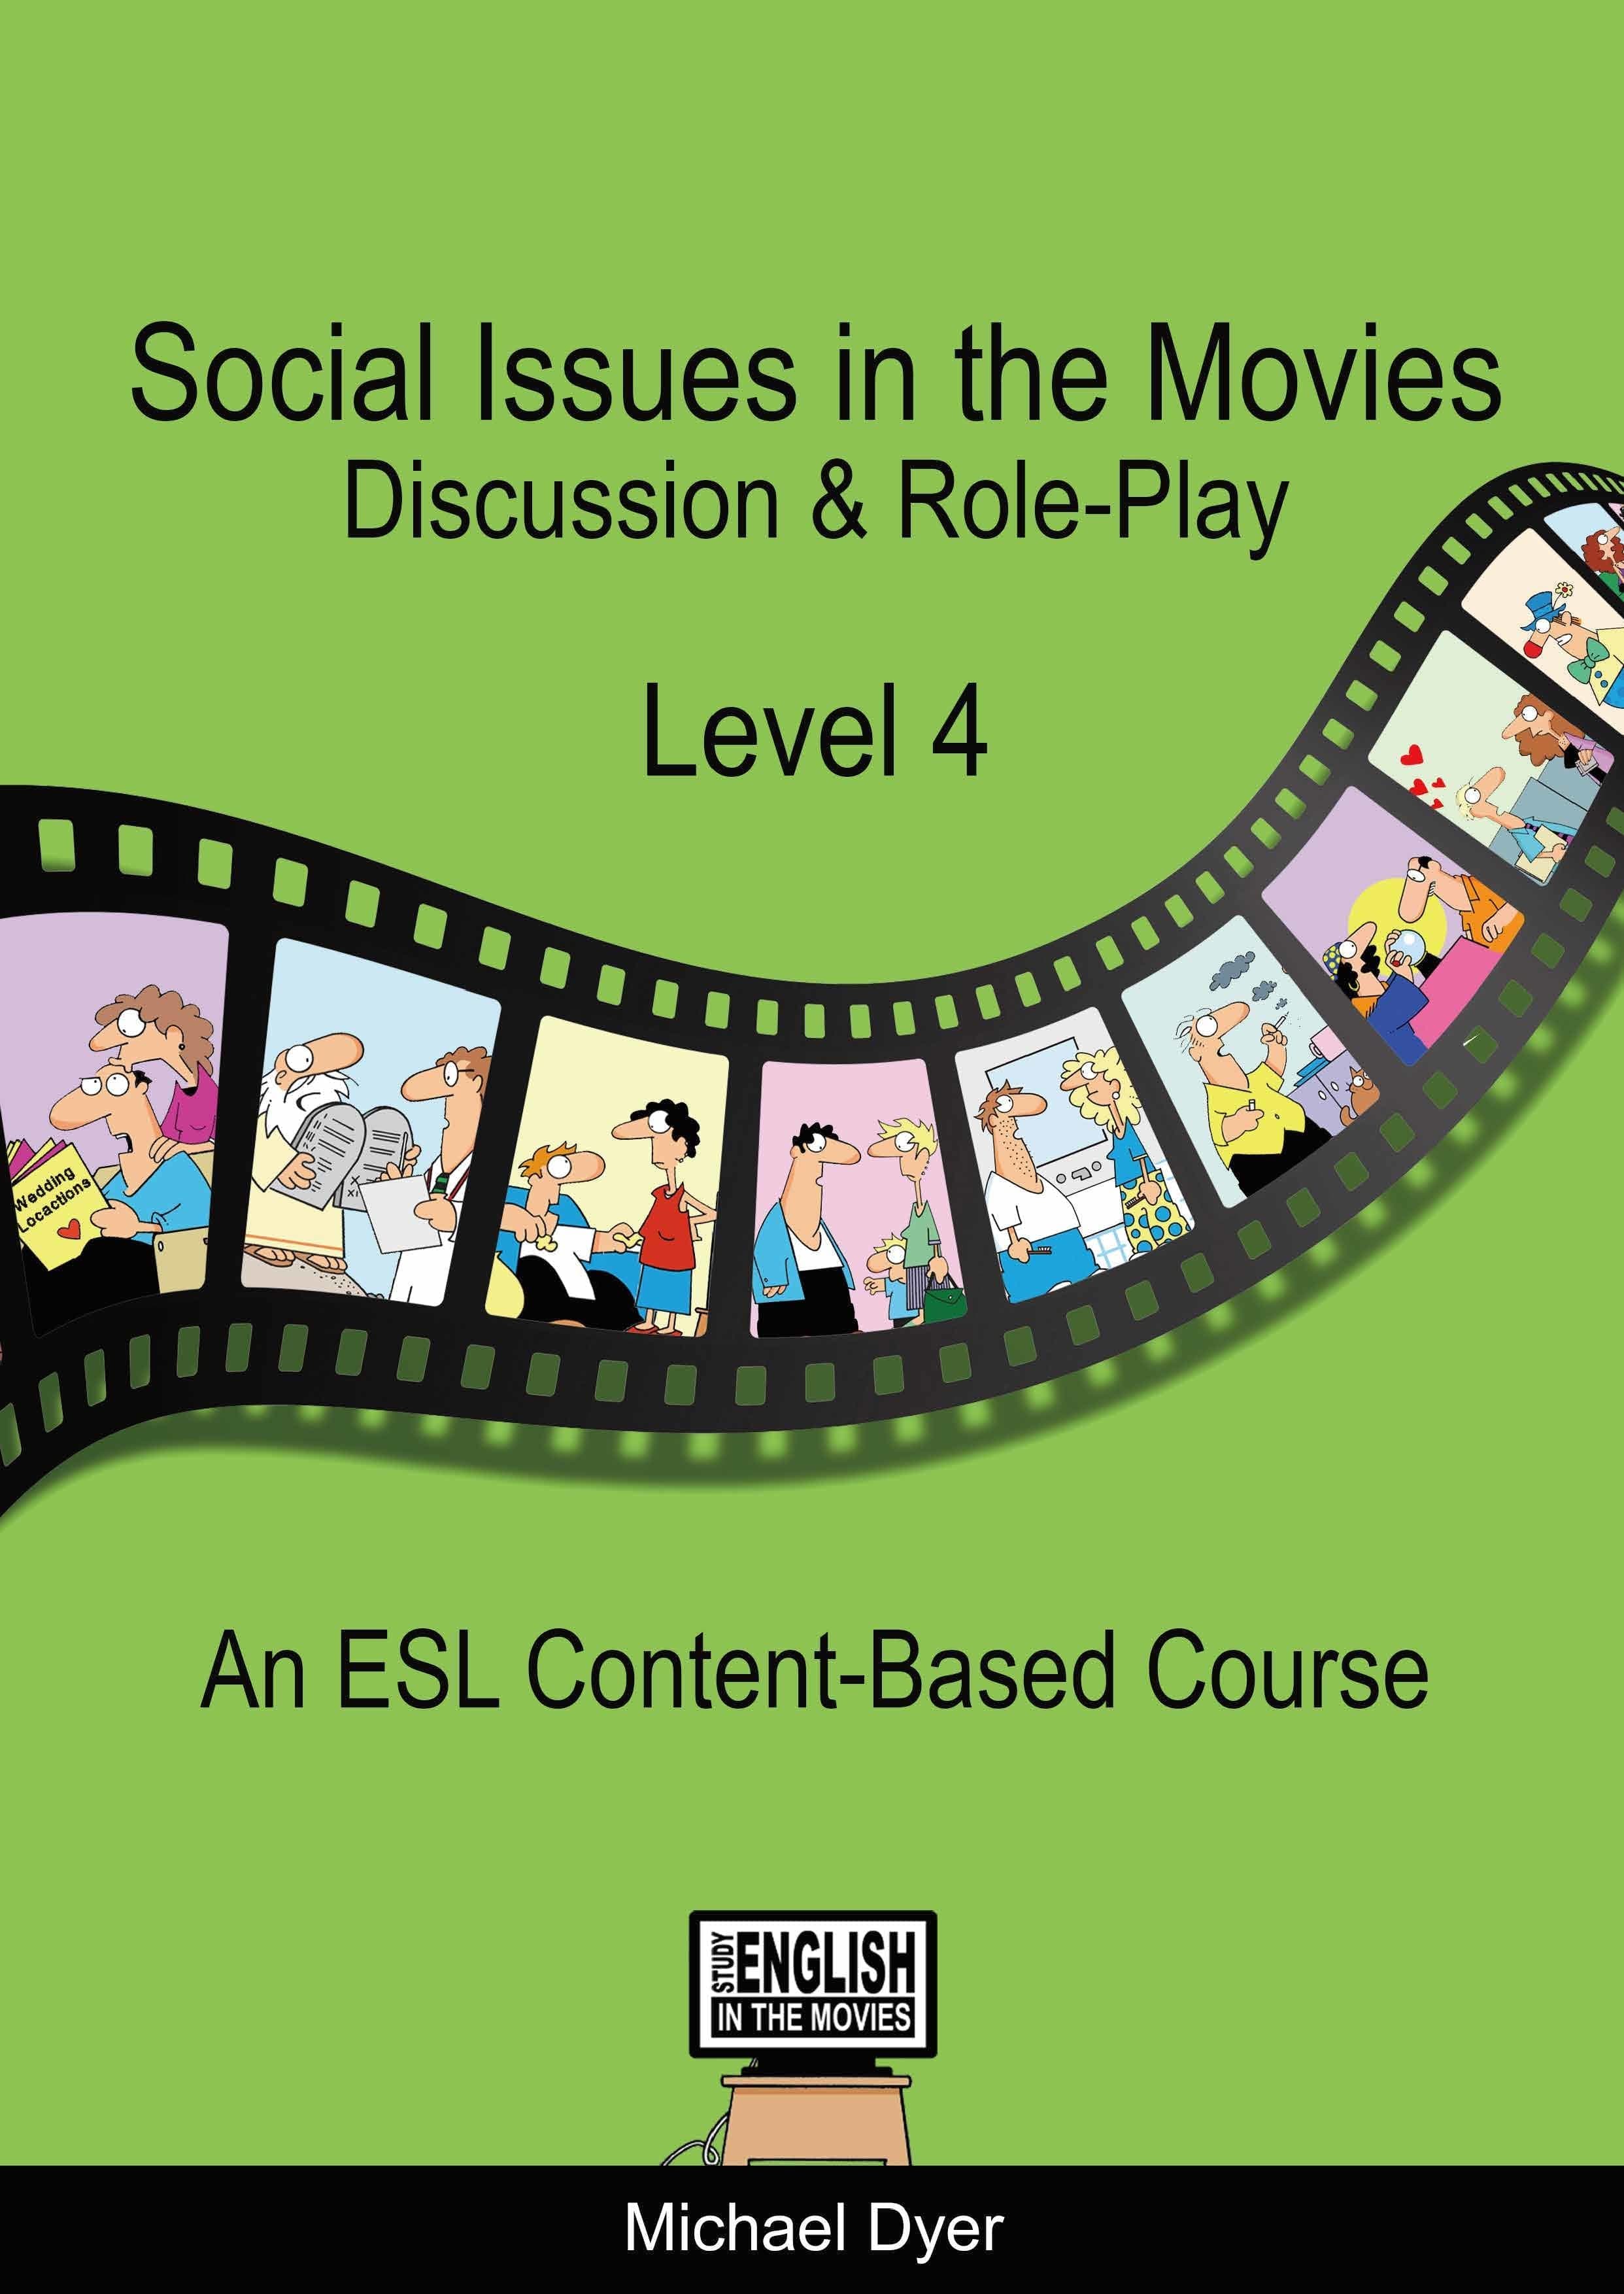 『Social Issues in the Movies Level4』Michael Dyer　著